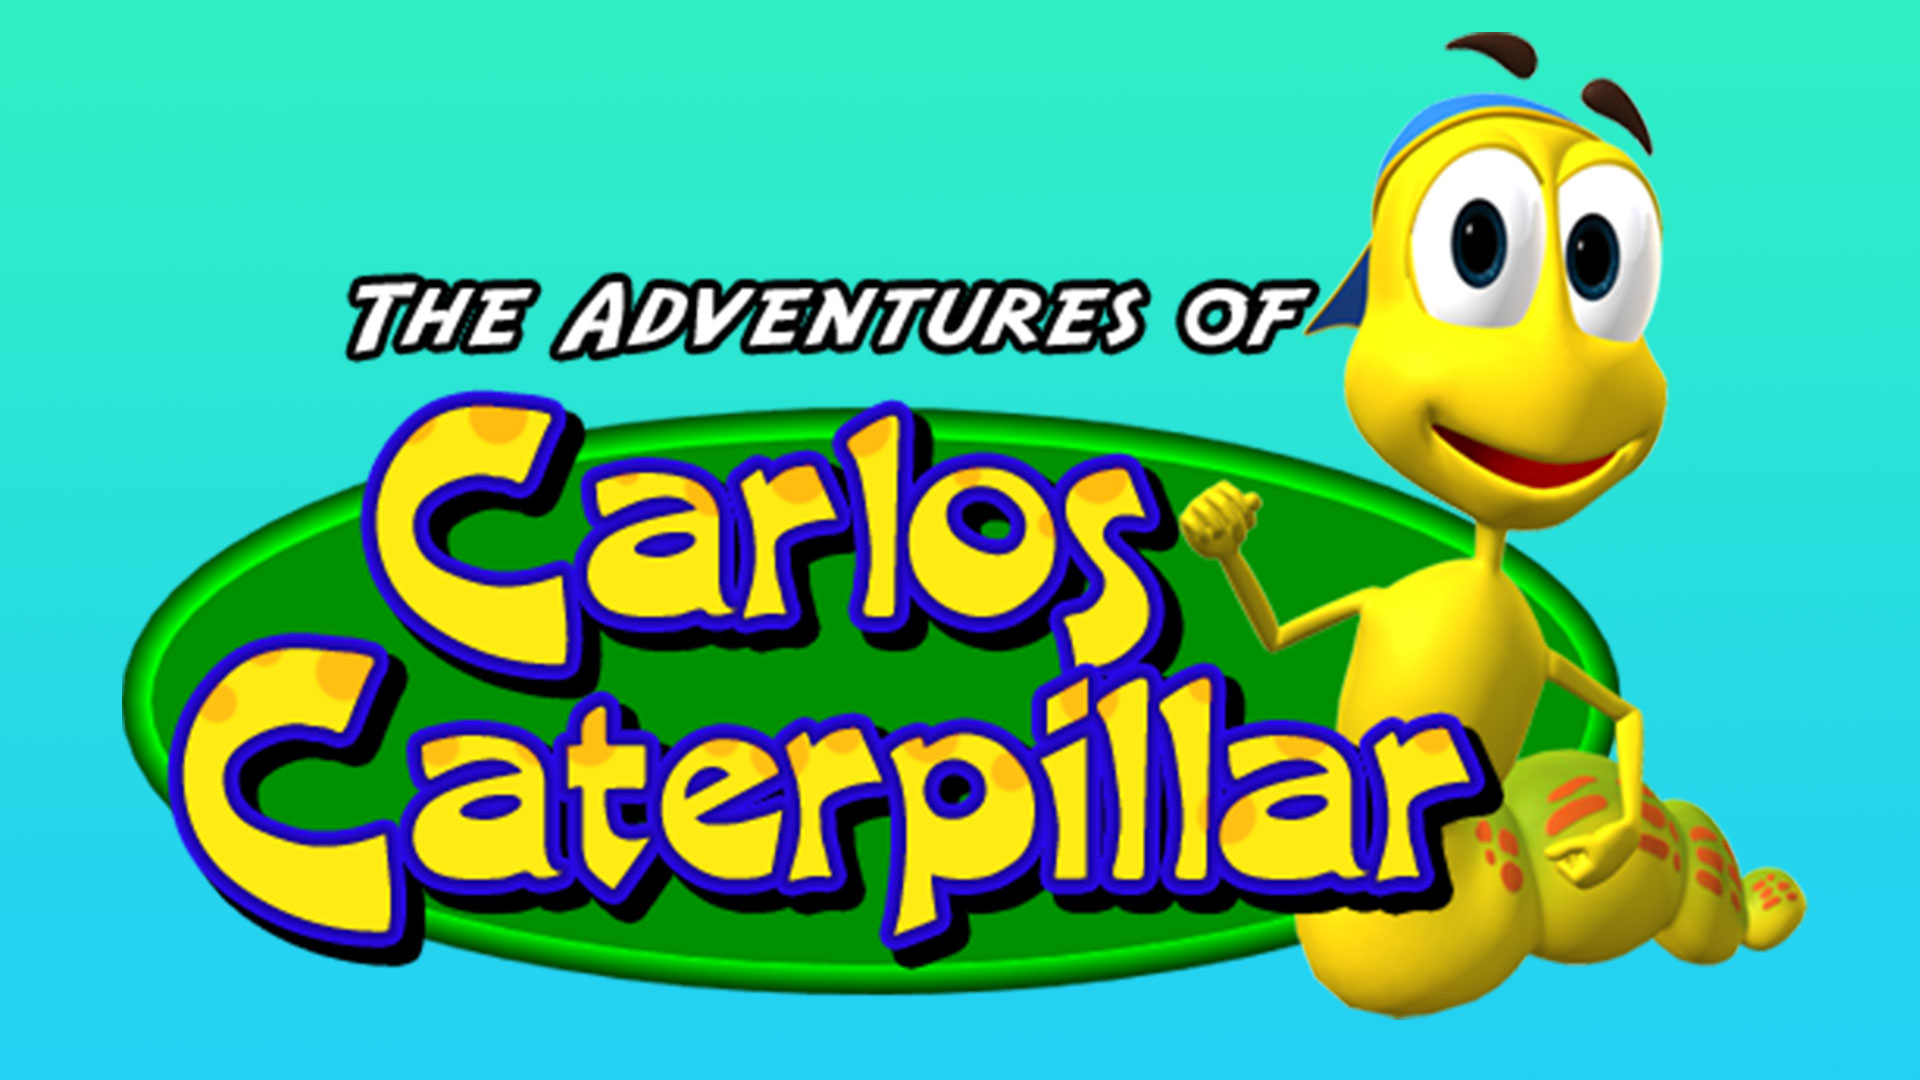 The Adventures of Carlos Caterpillar - FORMED